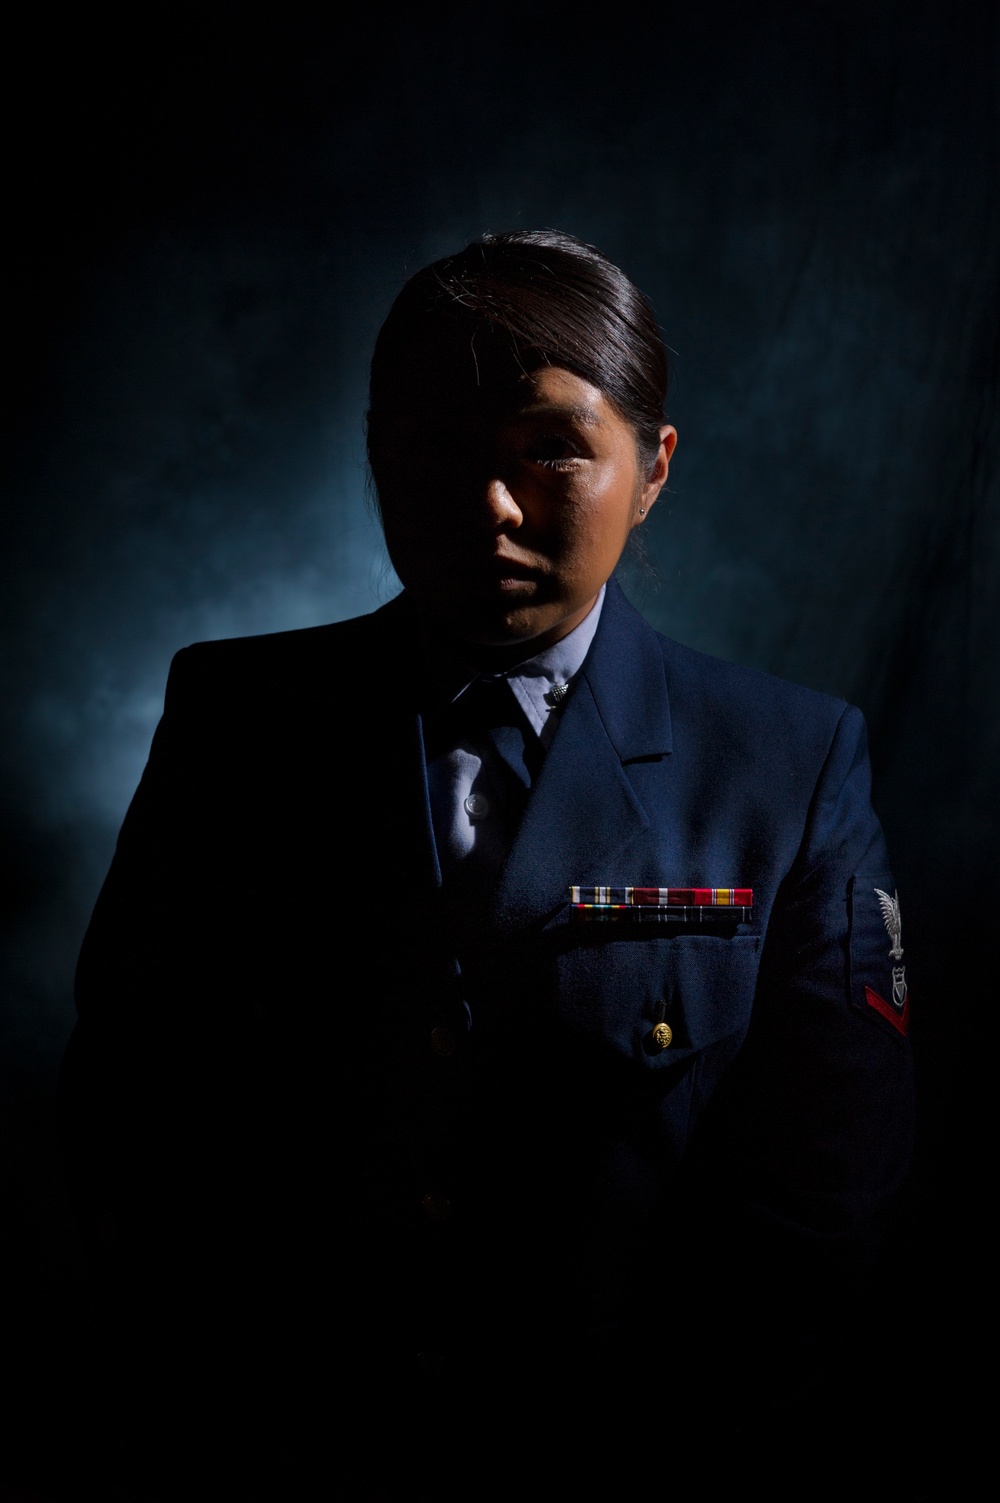 Highlighting women of character: Petty Officer 3rd Class Soto